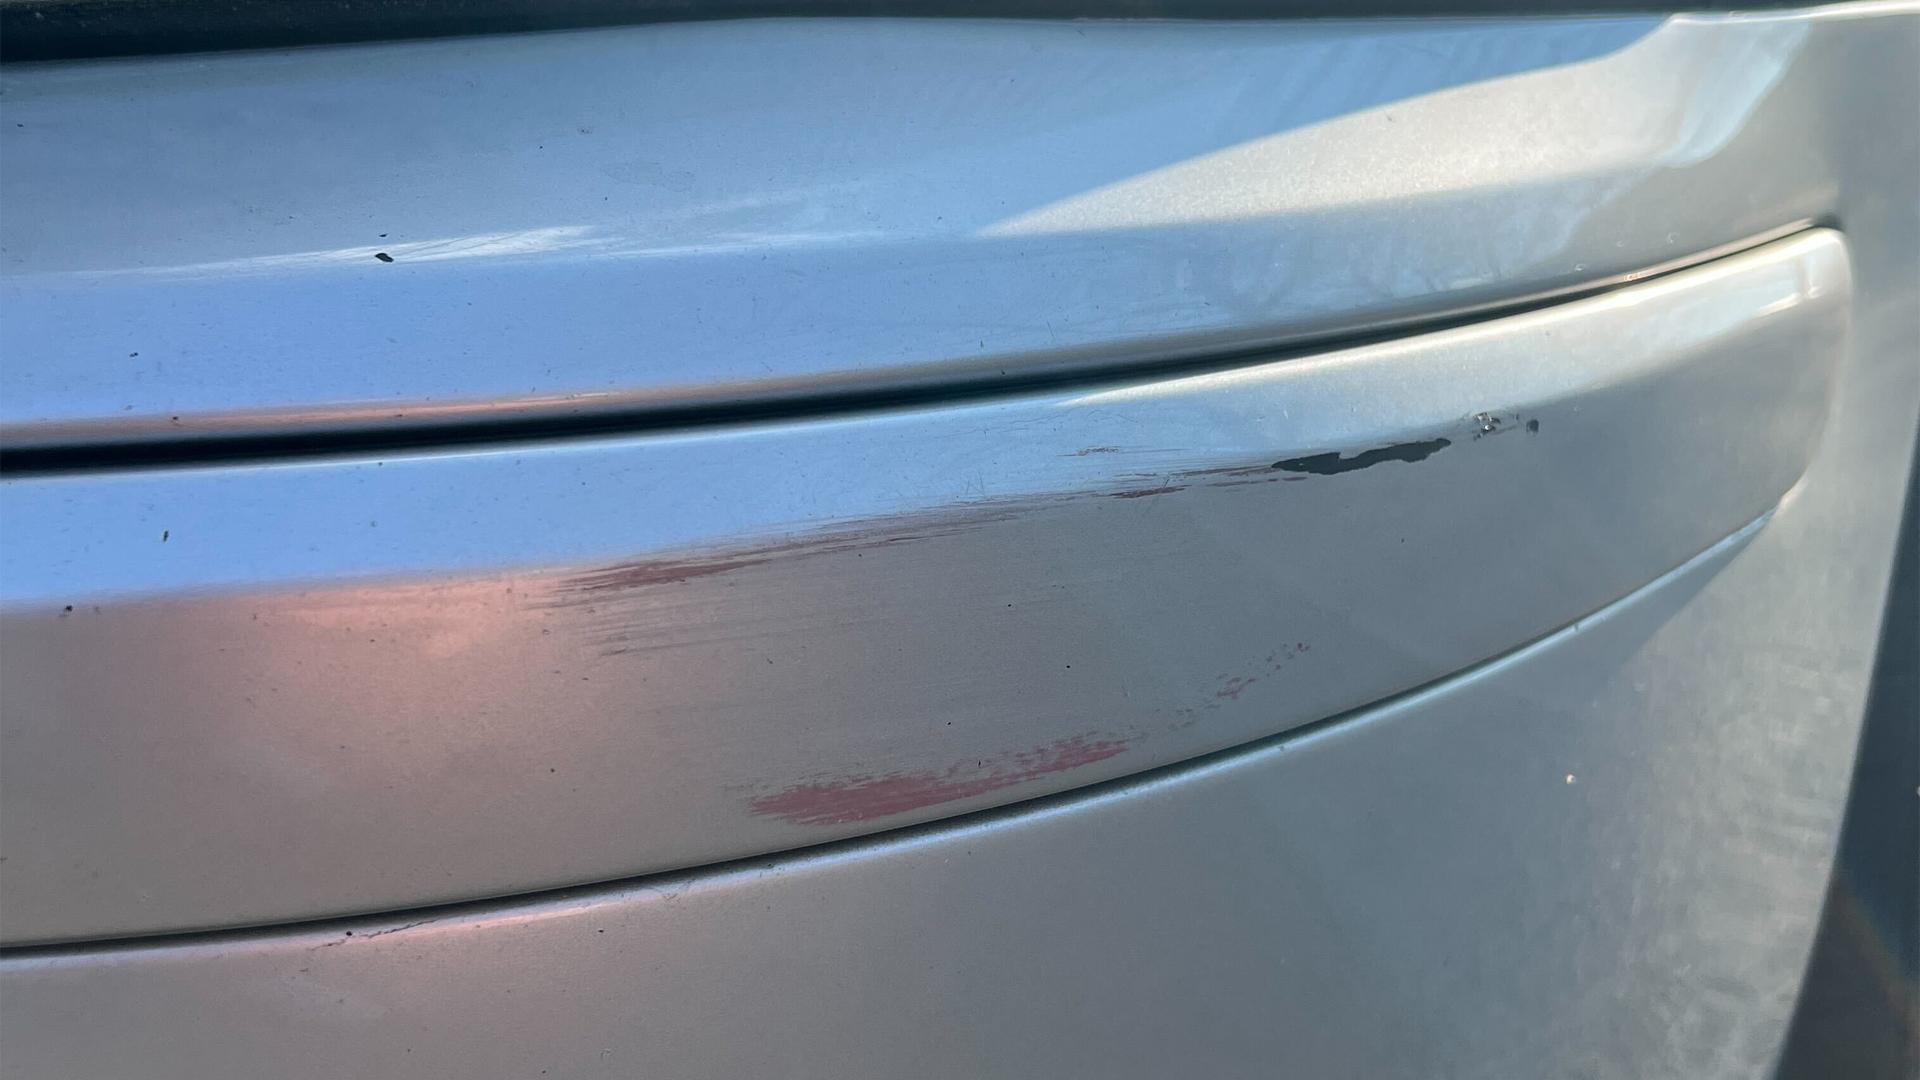 Can scratch-repair kits remove dings you get in the parking lot?